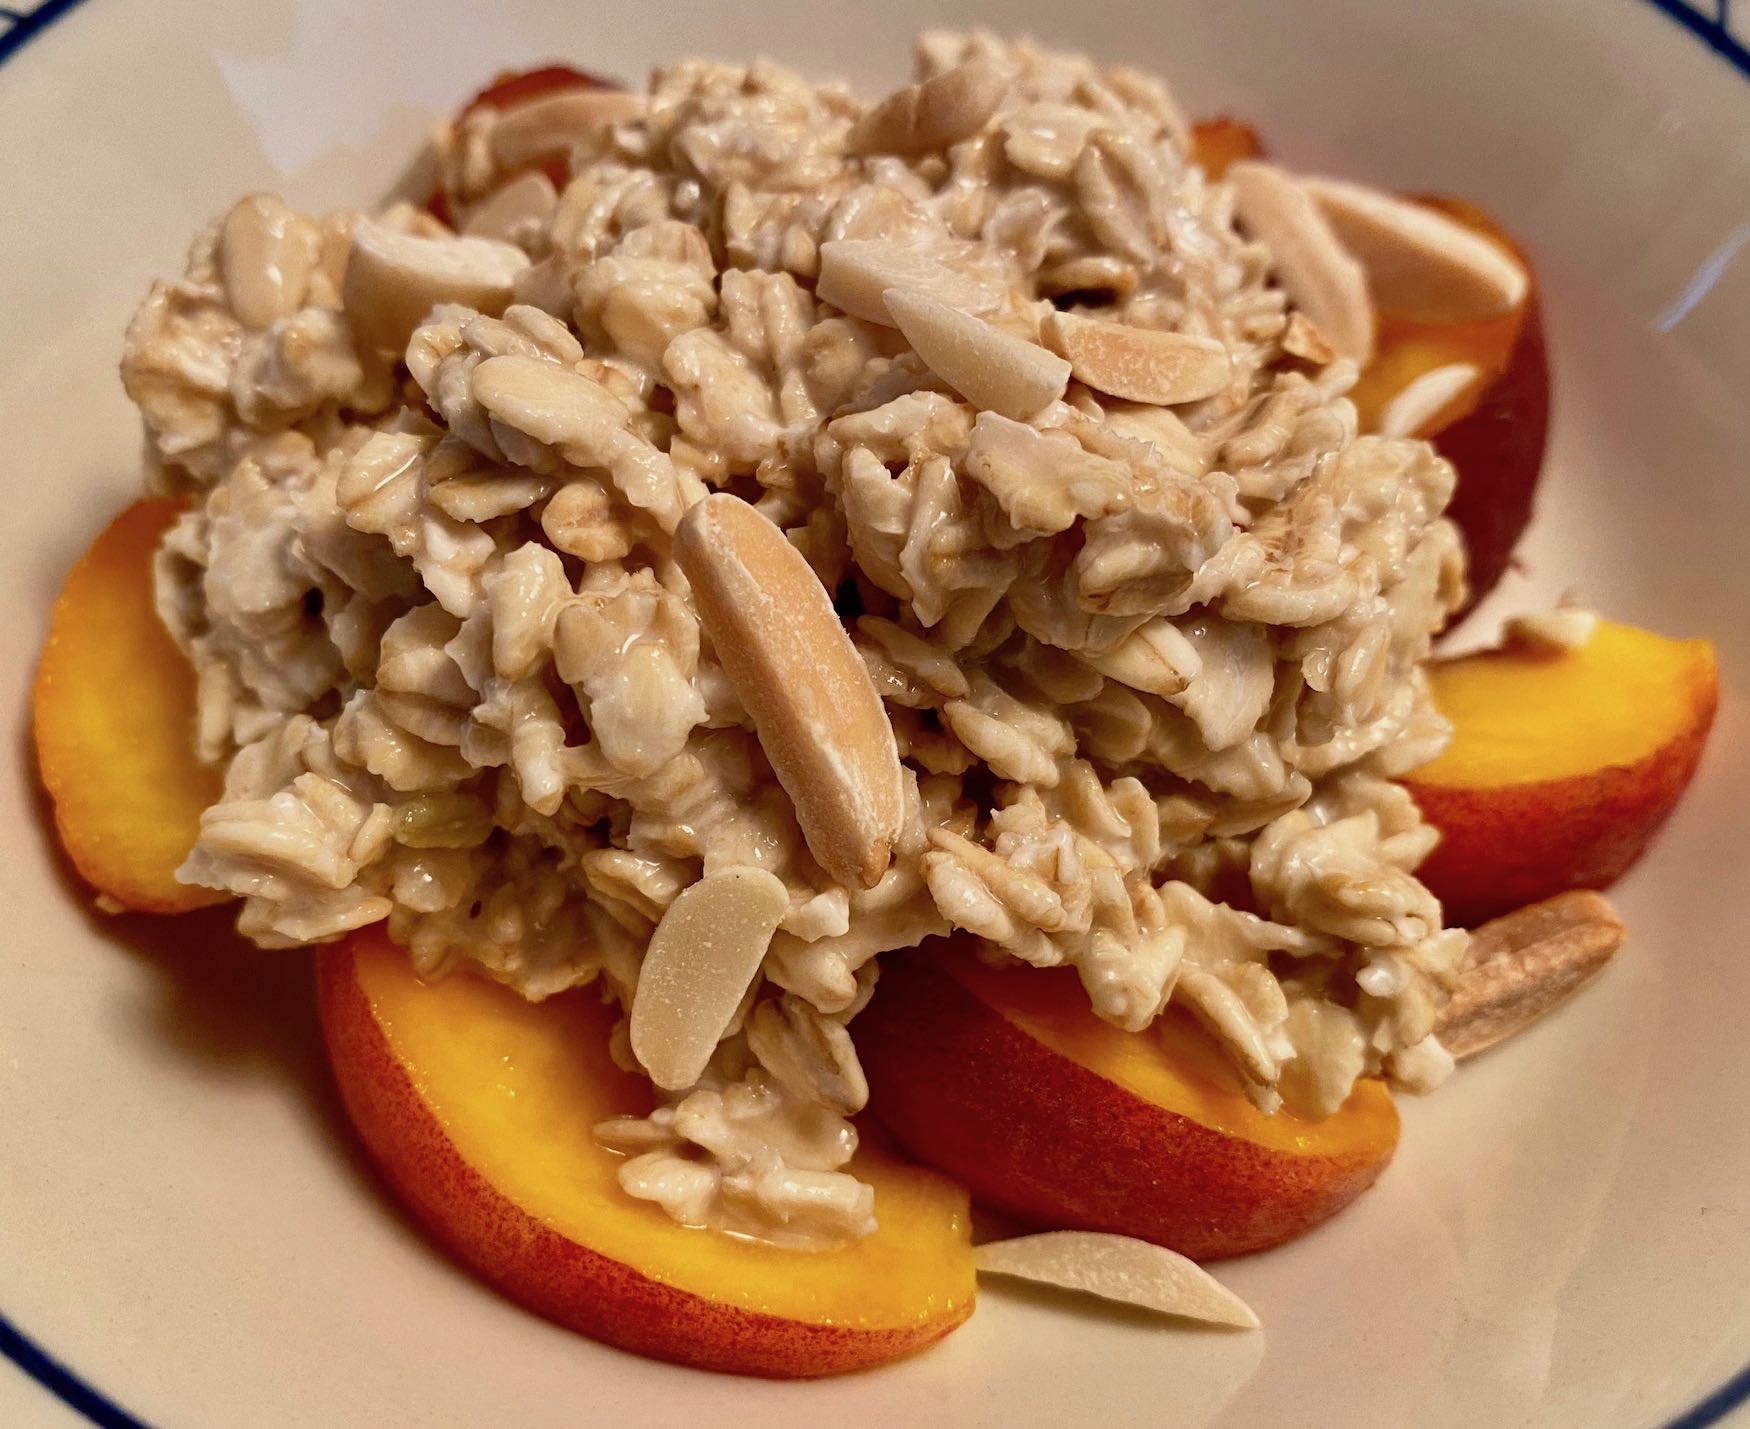 Almond Overnight Oats with Sliced Peaches and Toasted Almond Slivers